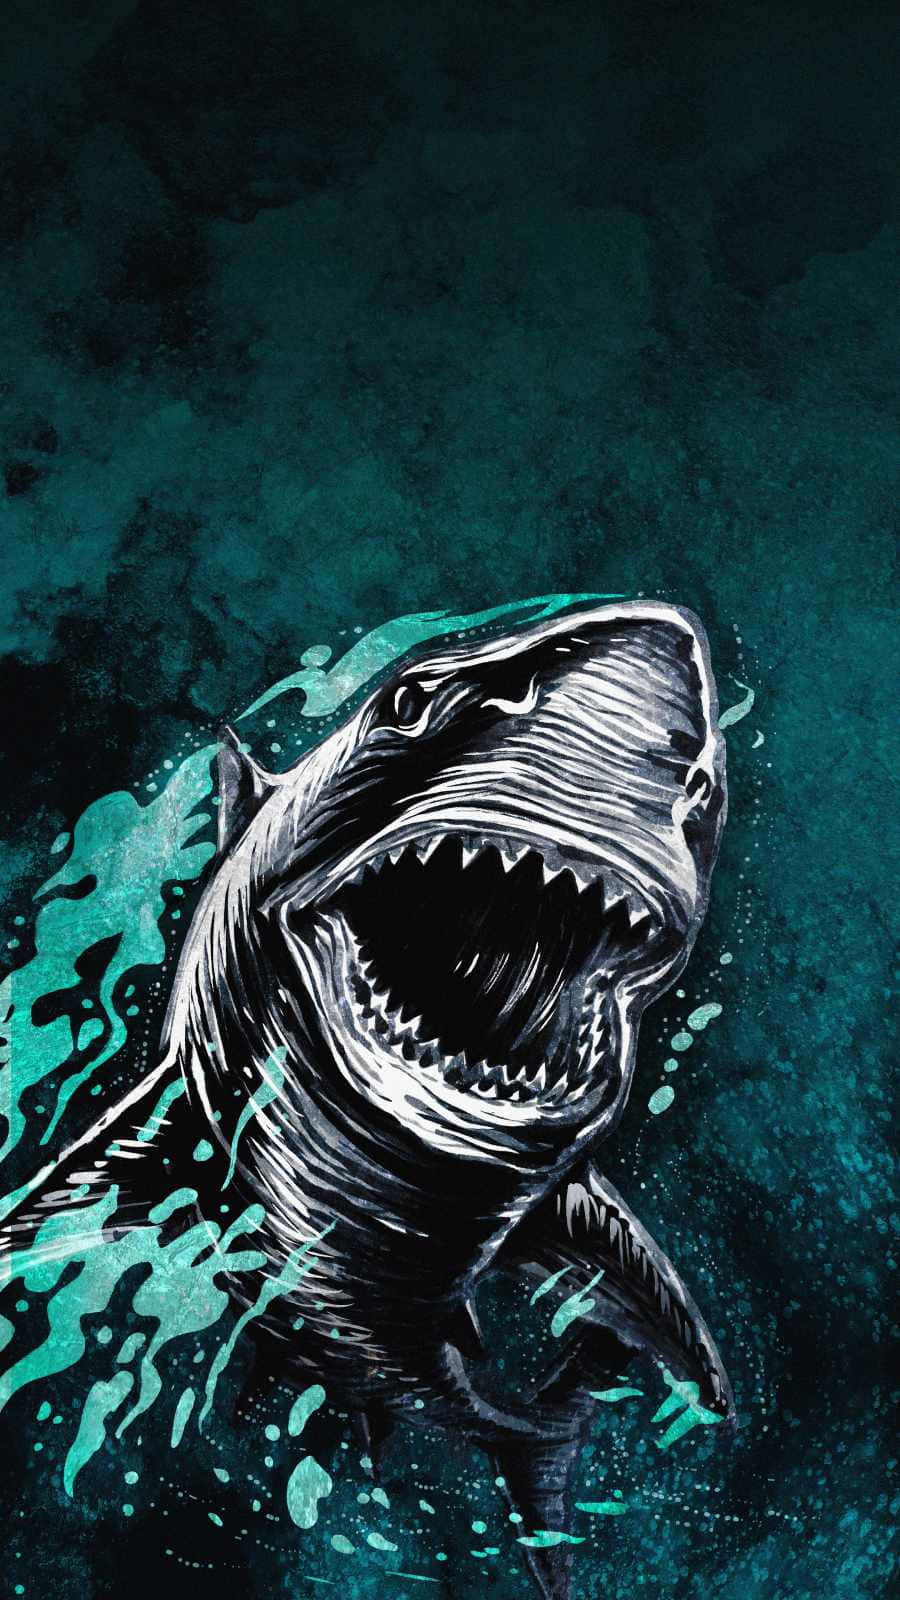 The stylish and powerful Shark Iphone Wallpaper